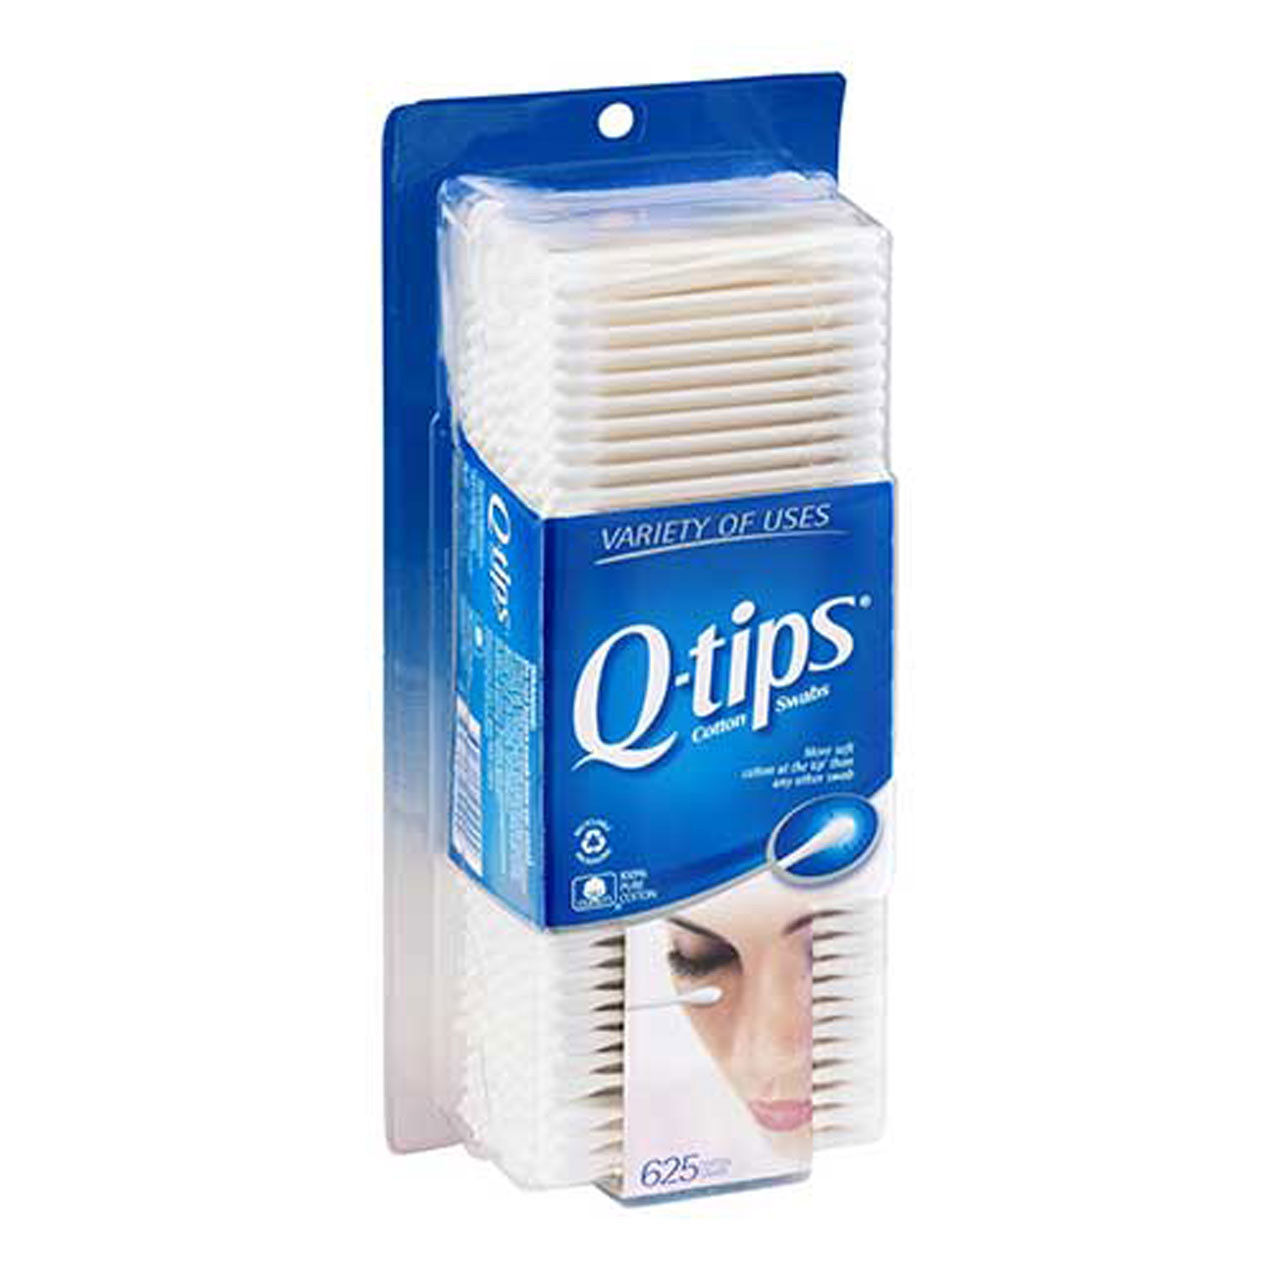 Are these qtips comfortable to use?